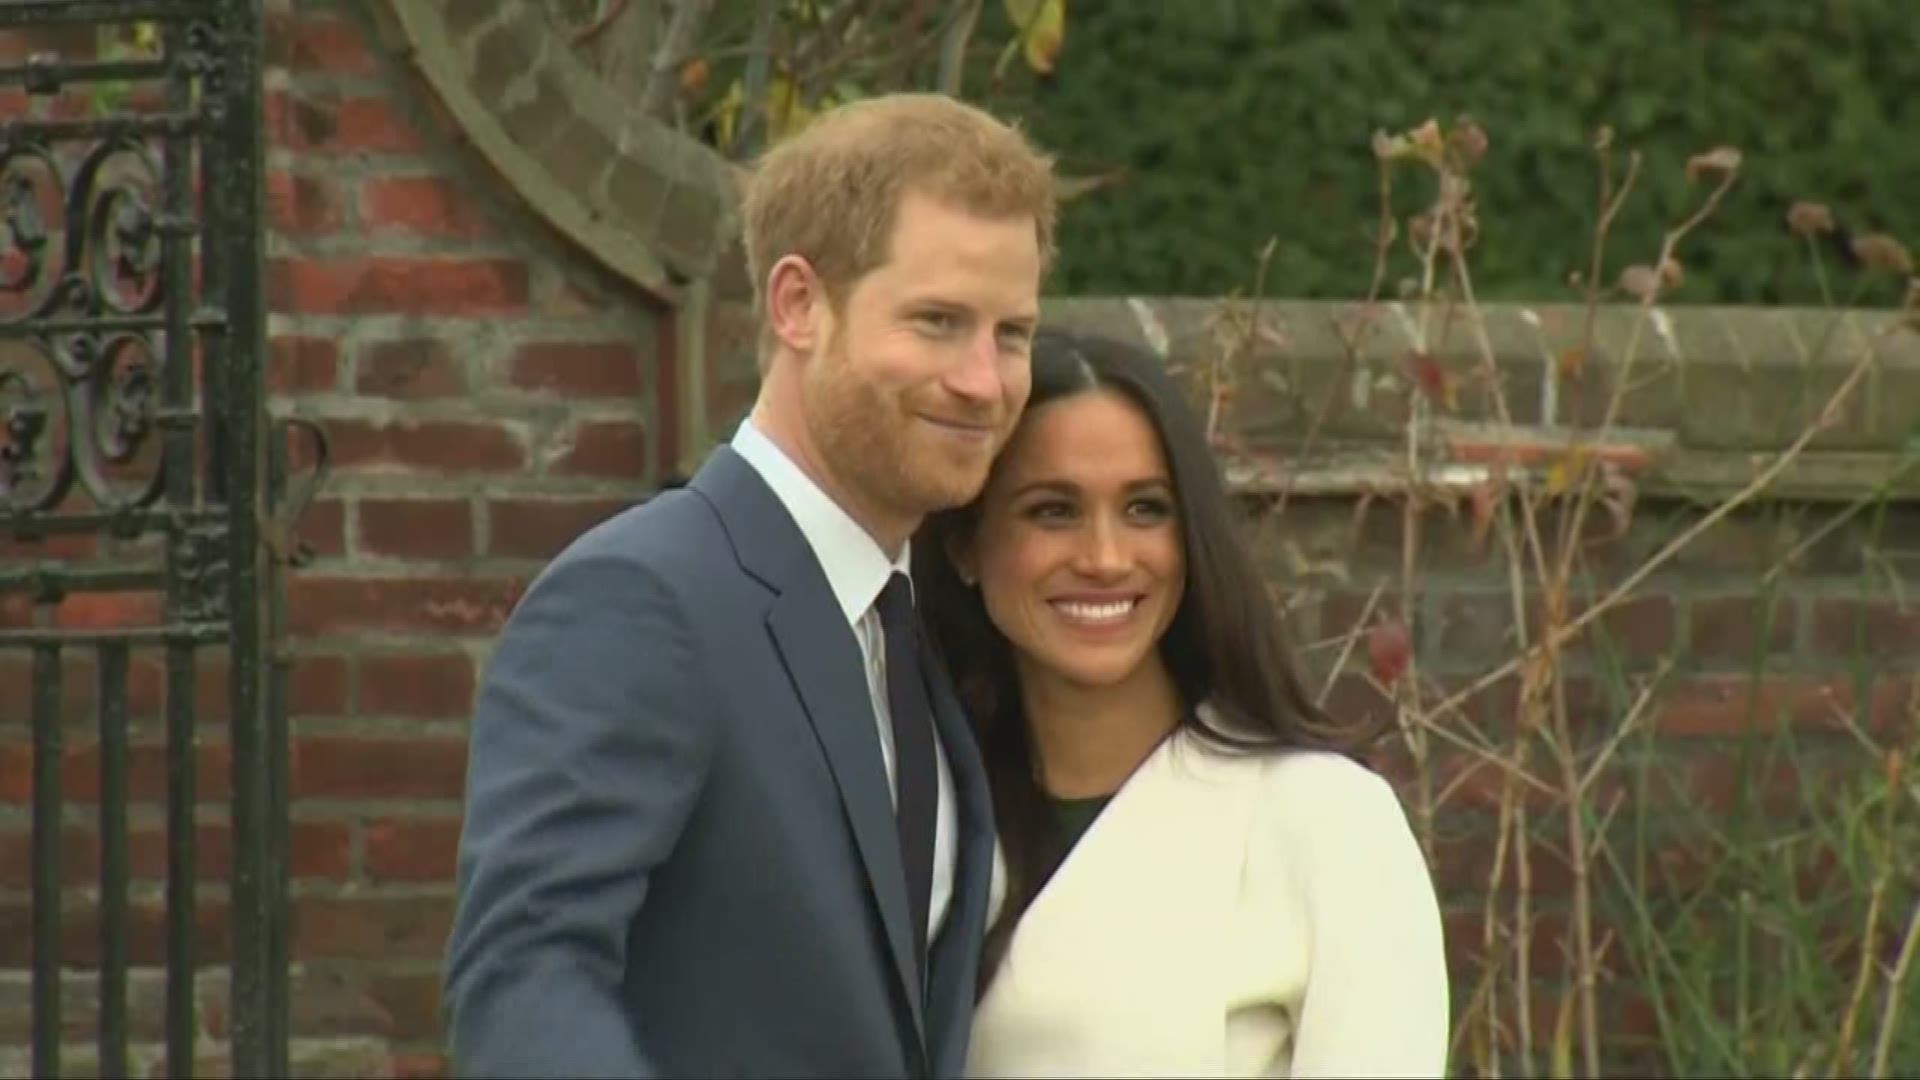 May 17, 2018: Here are some tips to make your own royal wedding in Northeast Ohio.